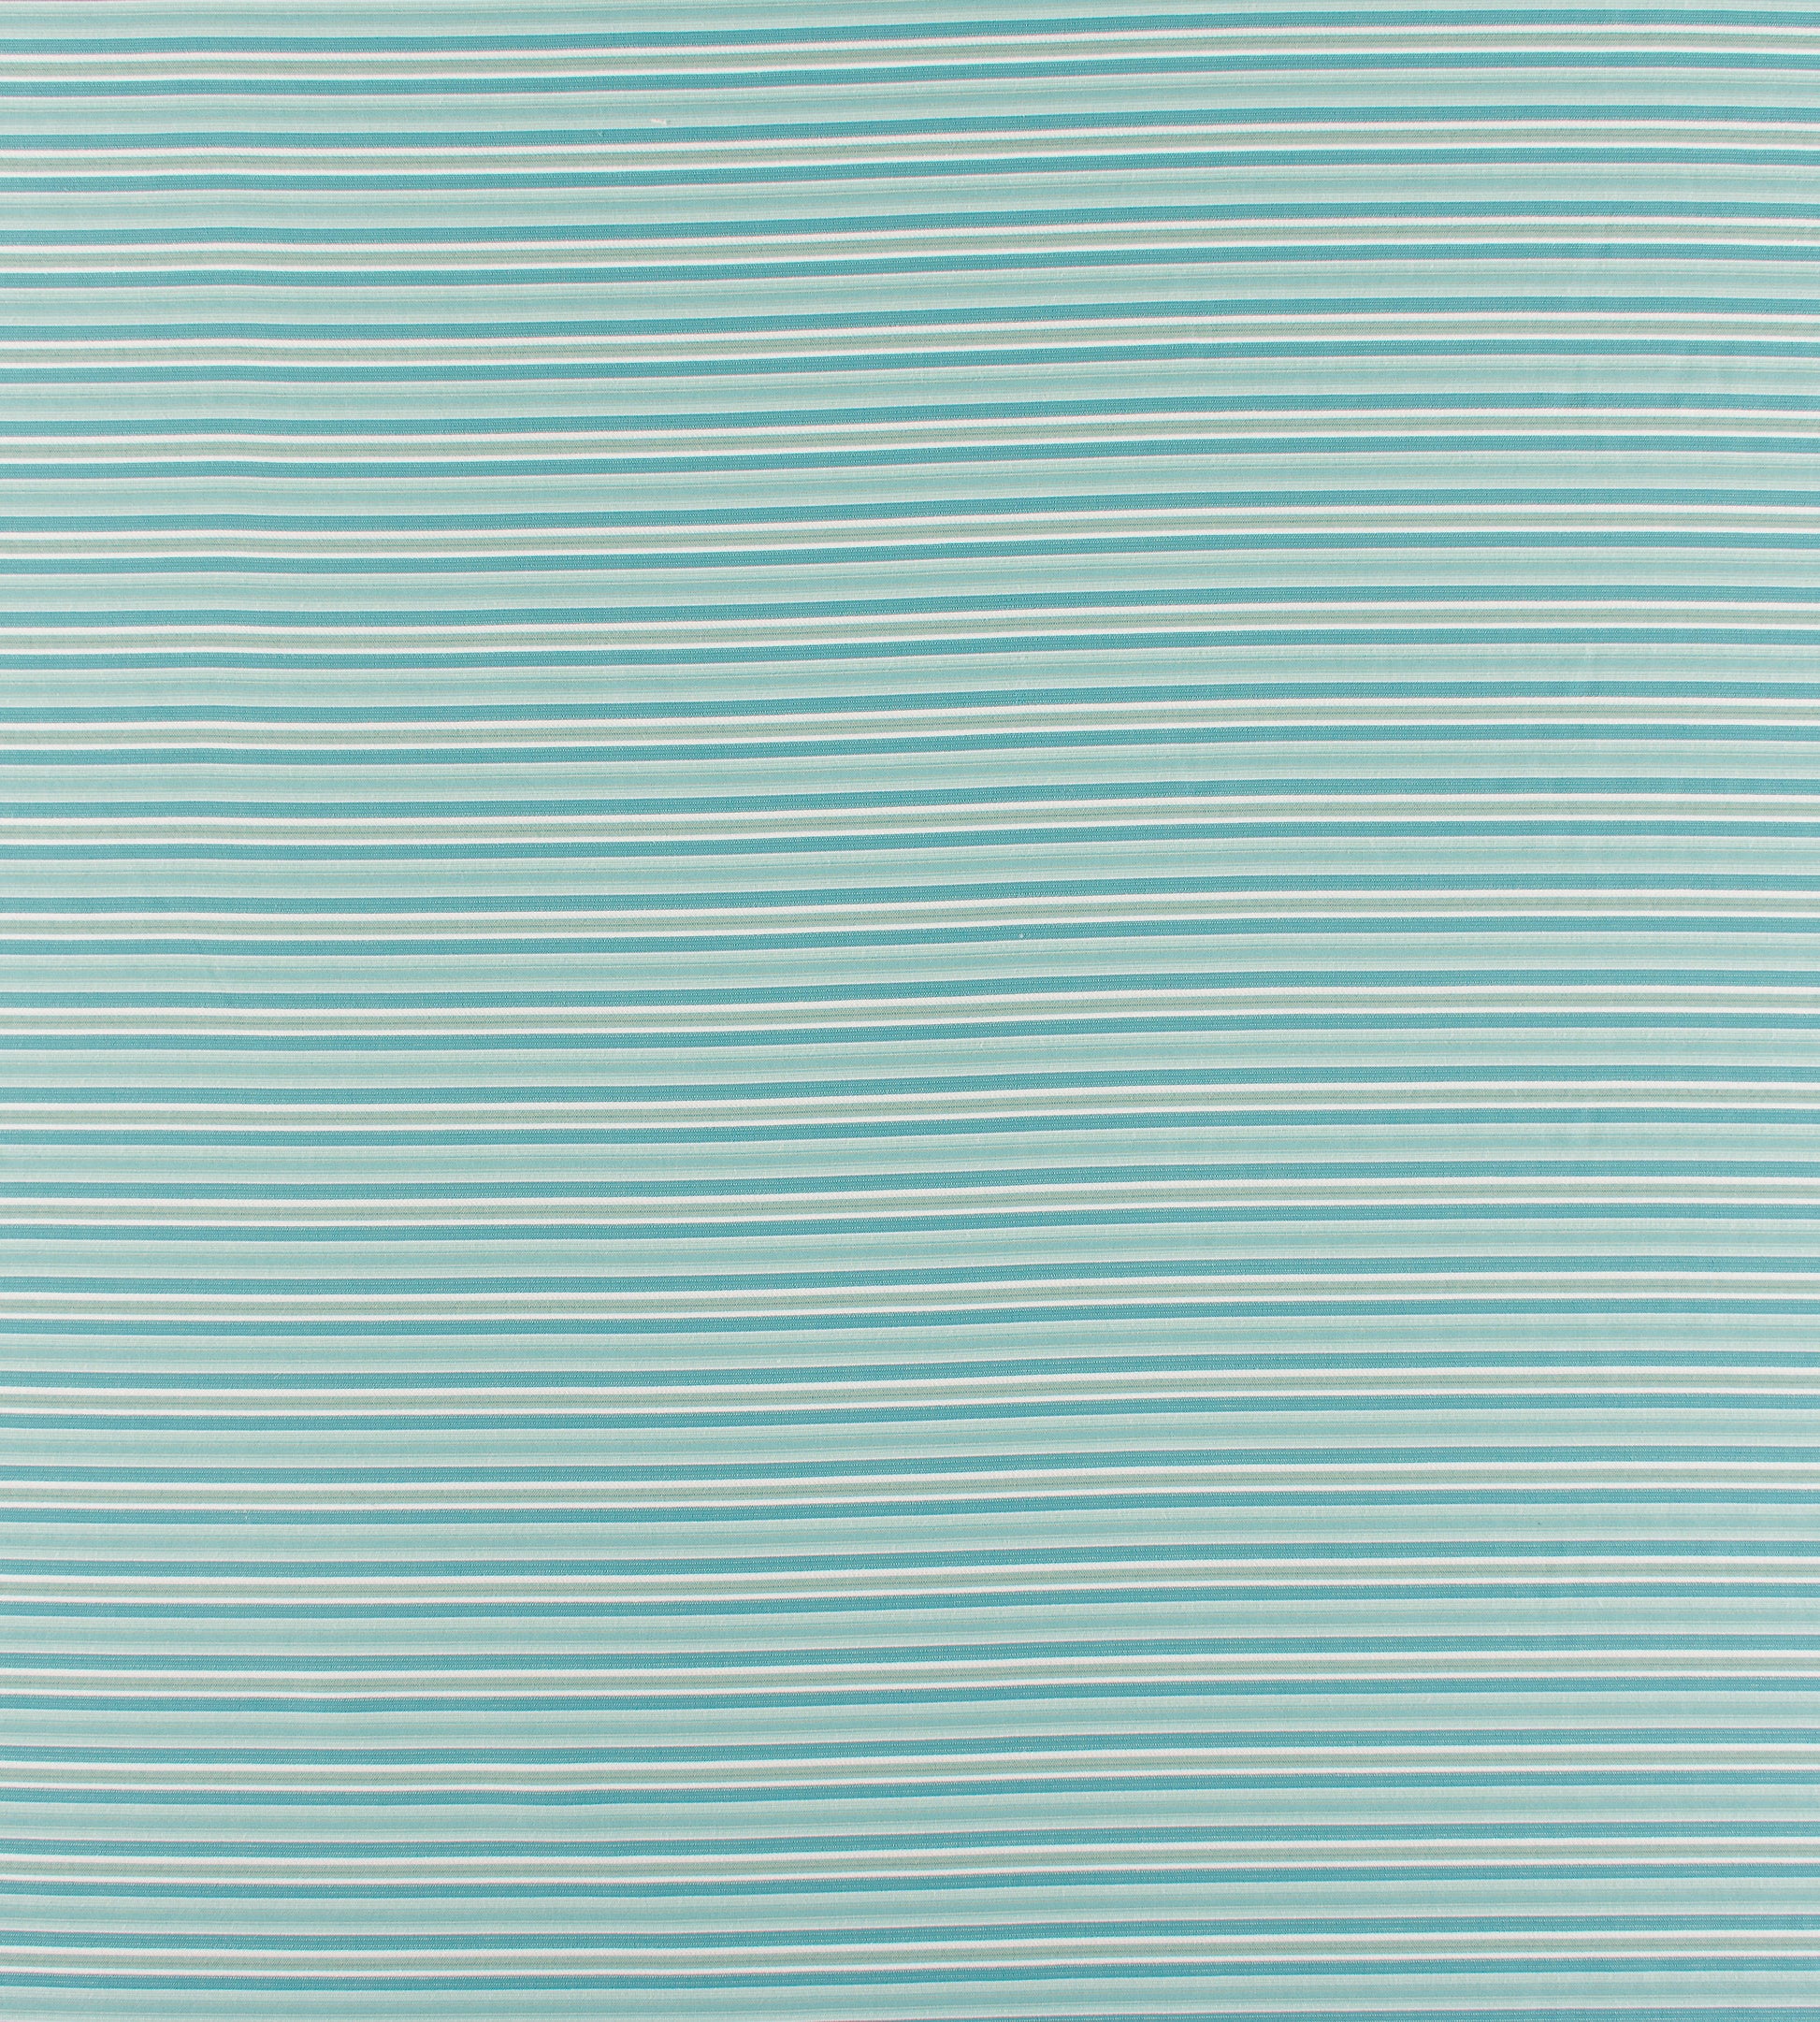 Purchase Old World Weavers Fabric SKU# WR 00022661, Steps Beach Turquoise 3